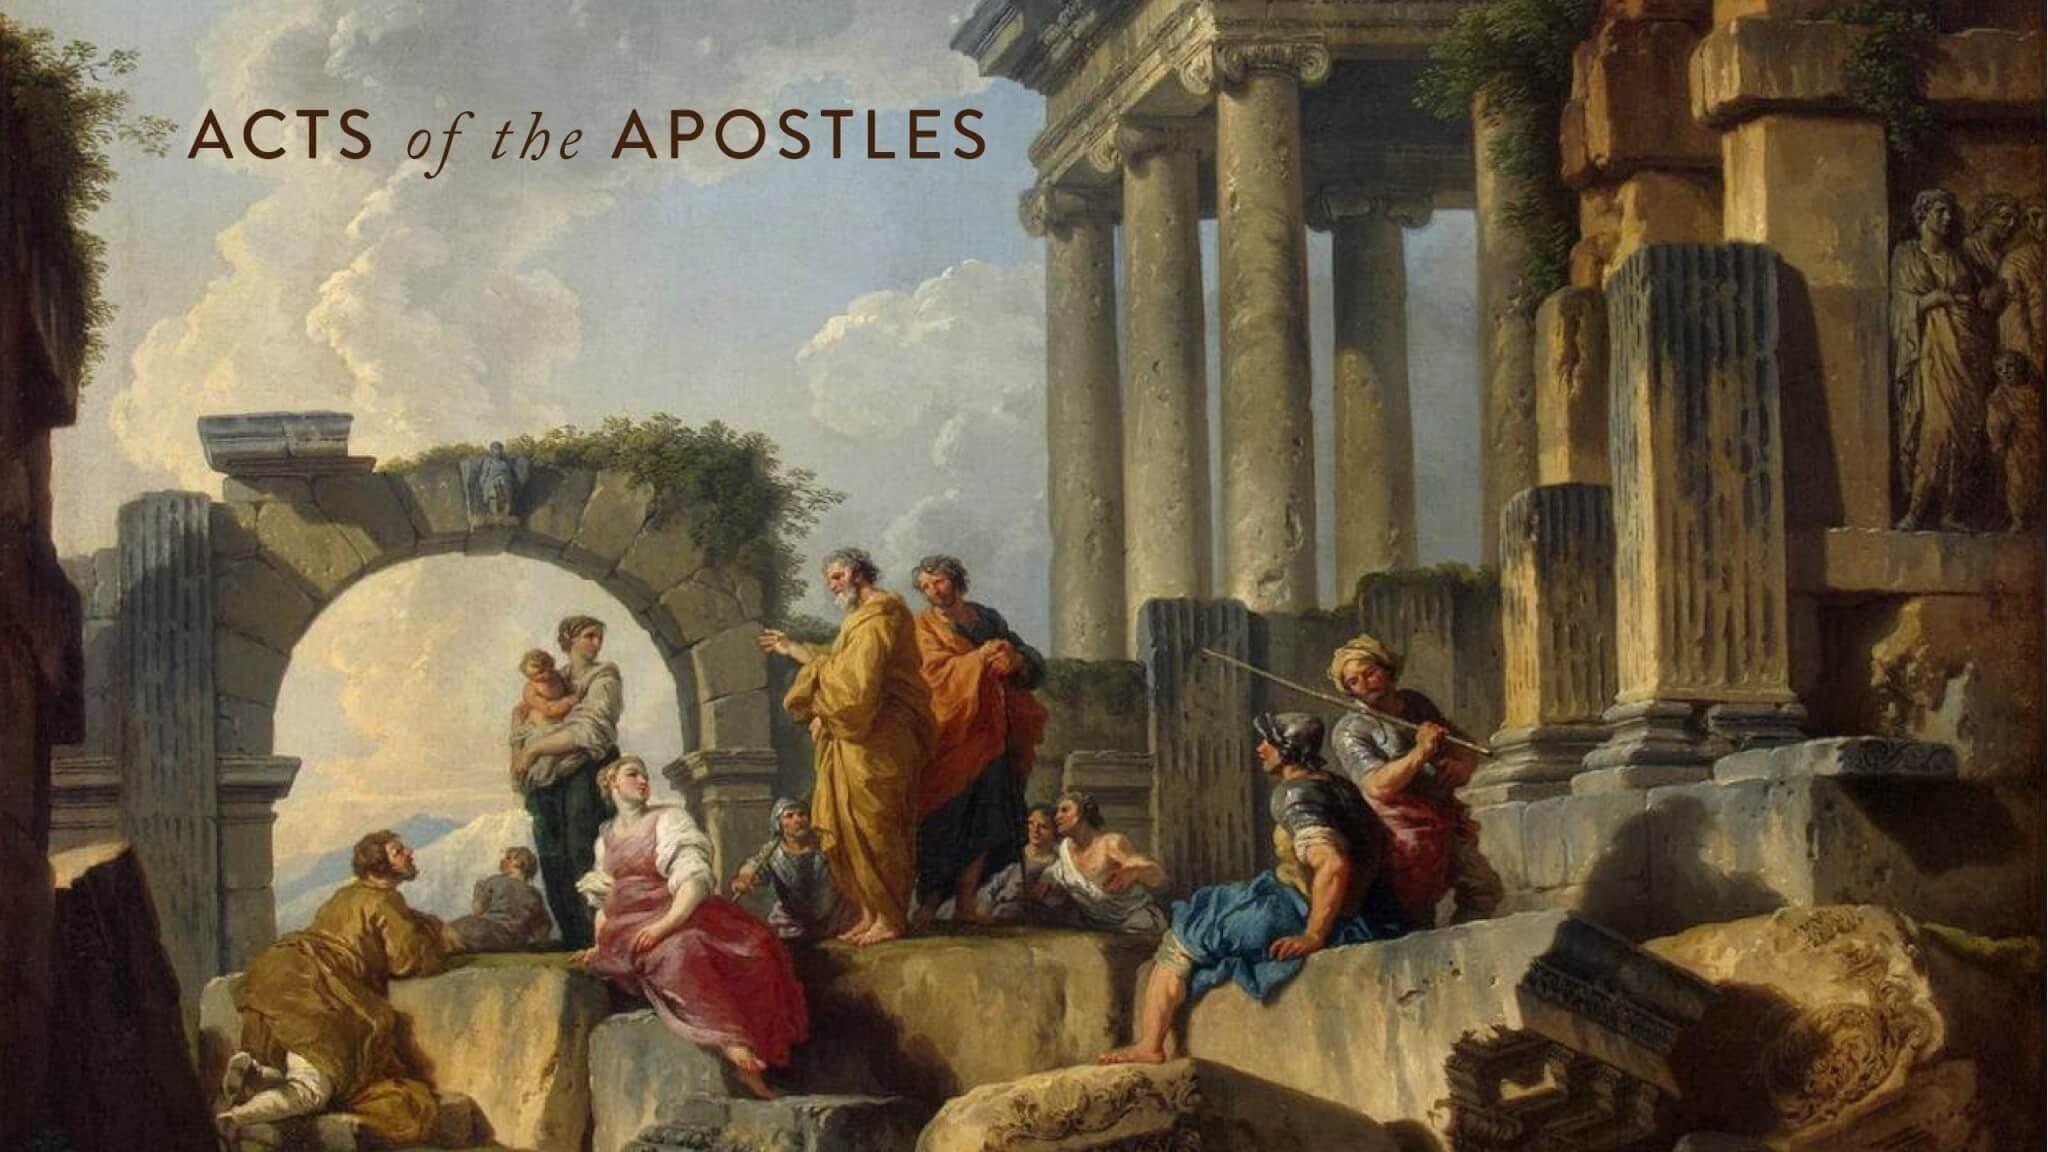 Acts: The Acts of the Apostles backdrop